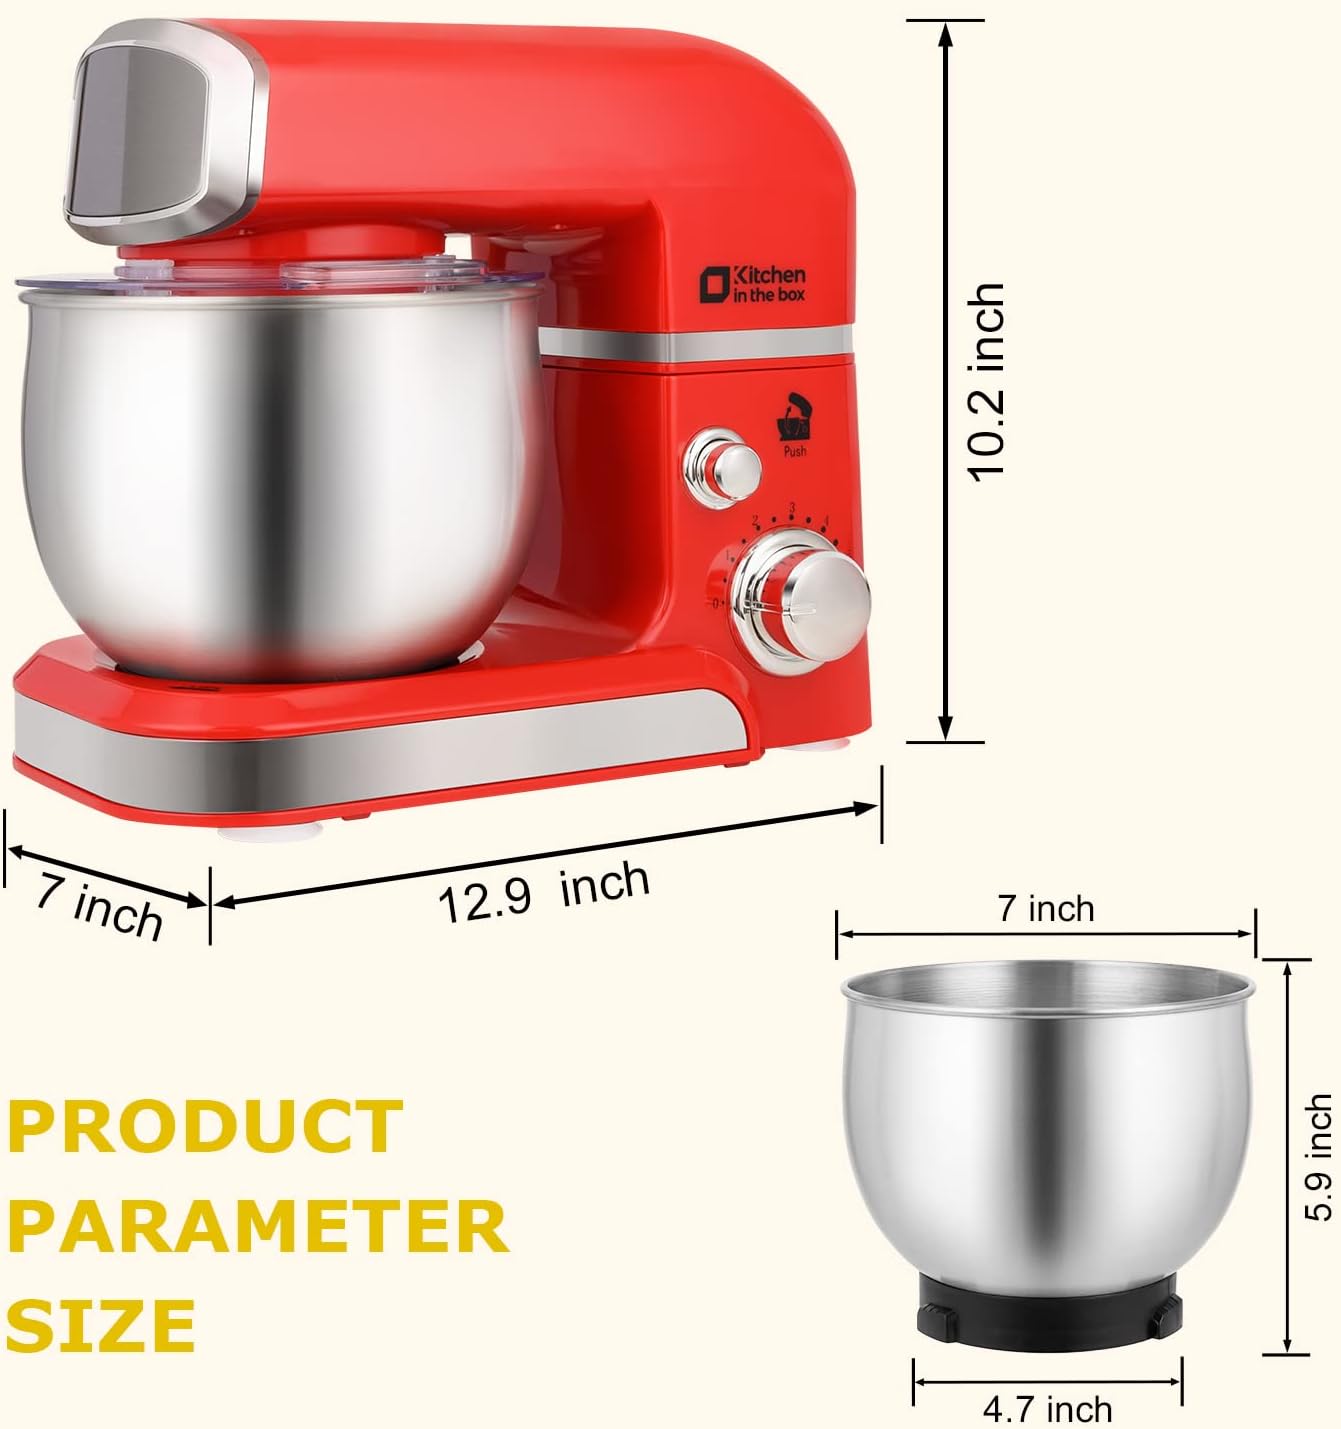 Kitchen in the box Stand Mixer Review